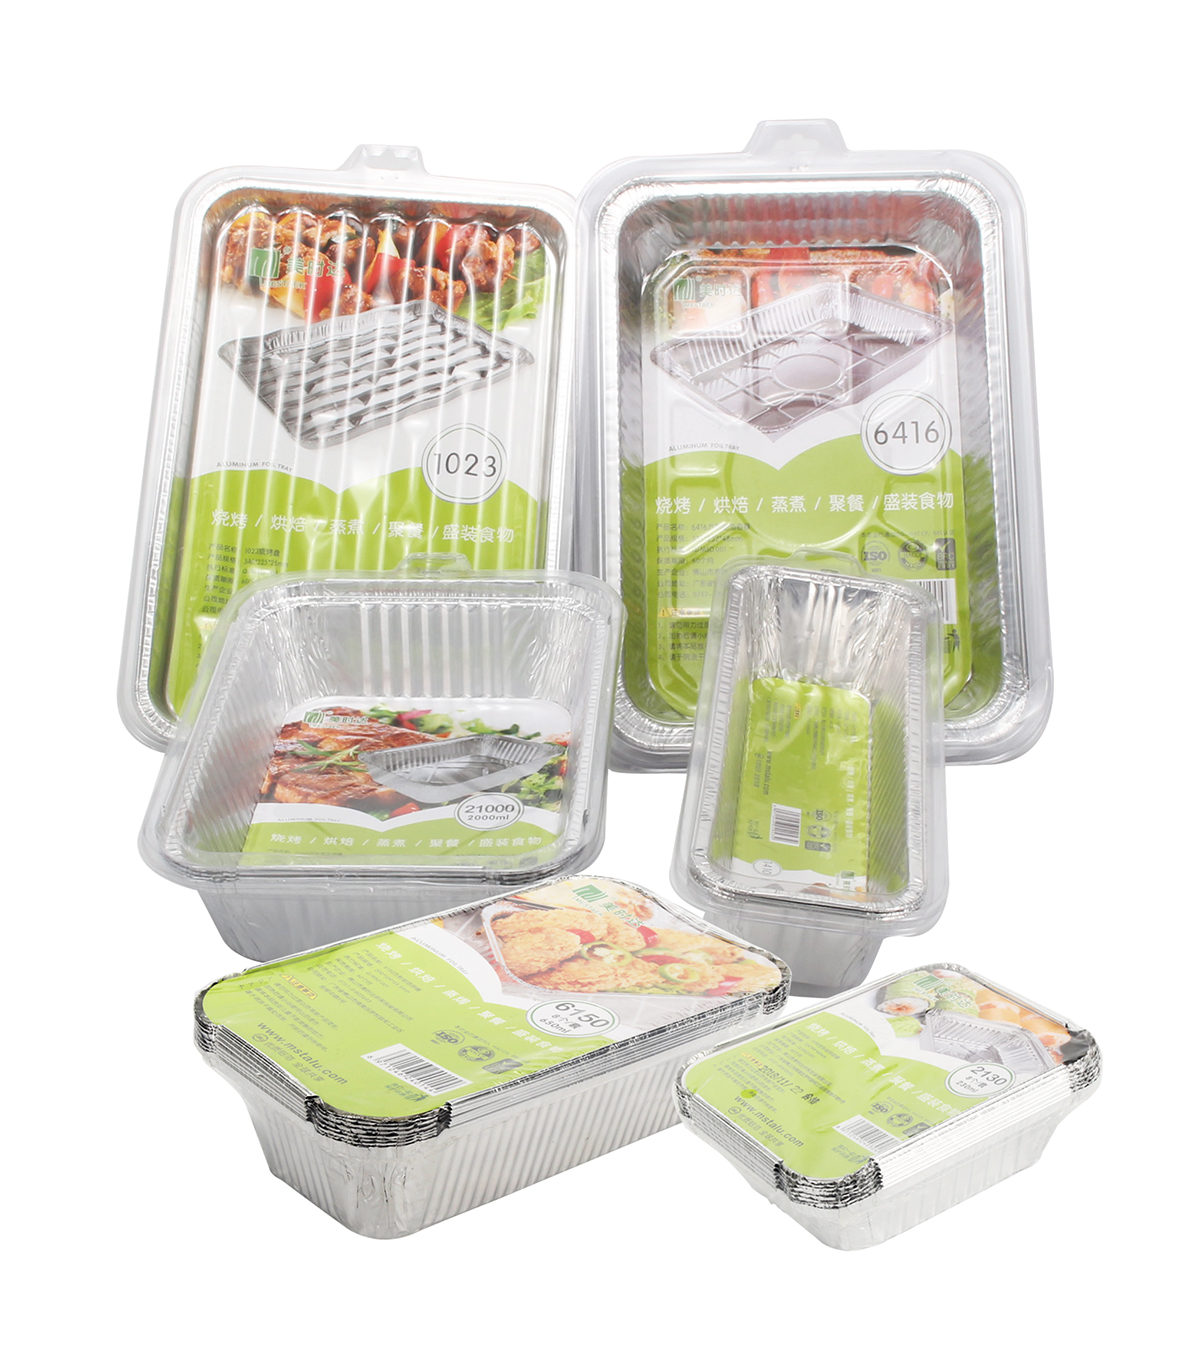 Take-Out Food Containers